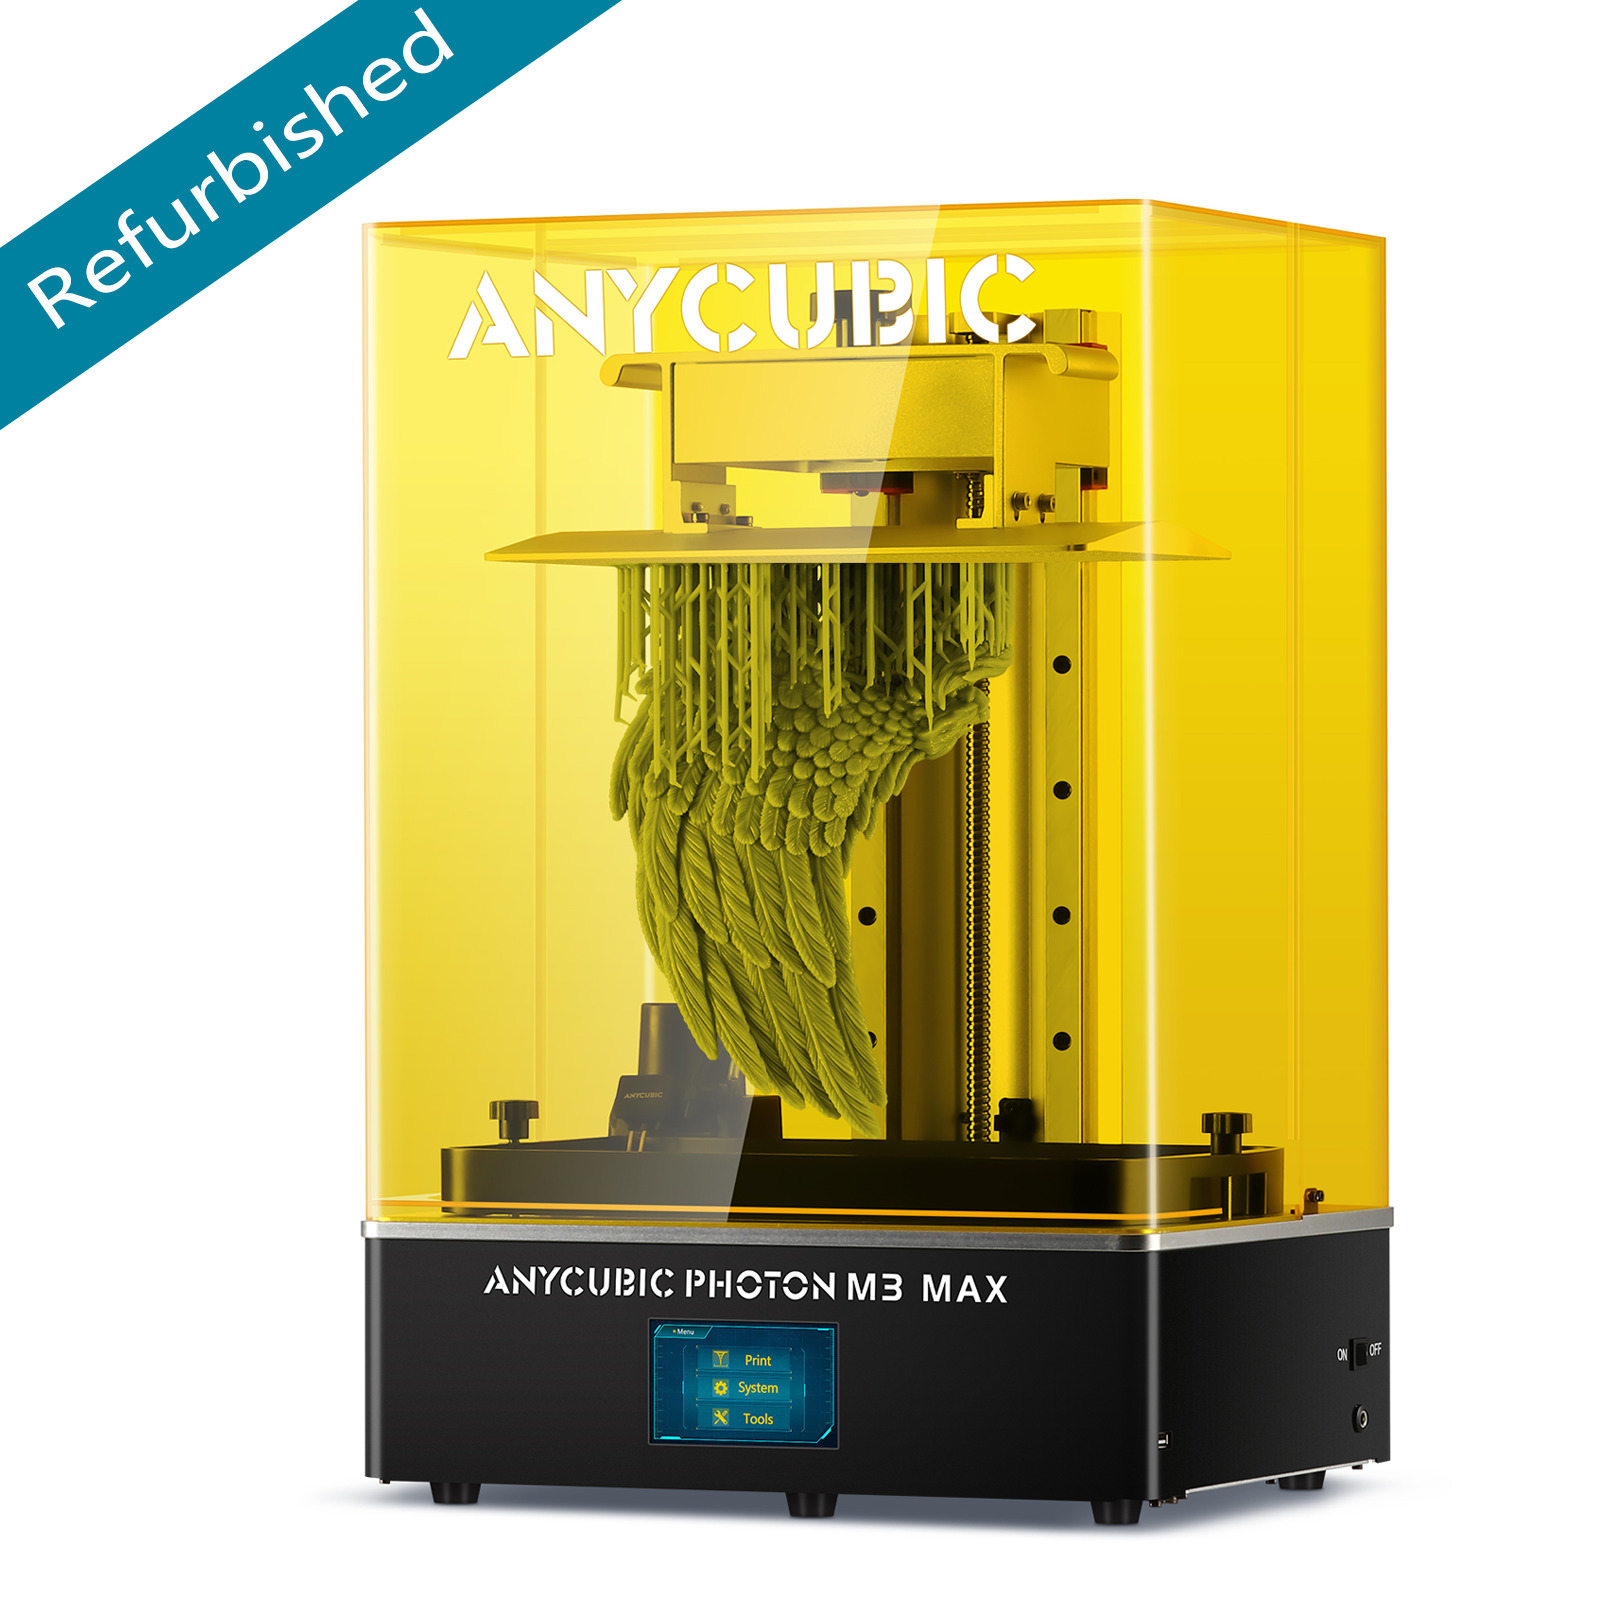 【Refurbished】ANYCUBIC Photon M3 Max Resin 3D Printer Large Size 298x164x300mm